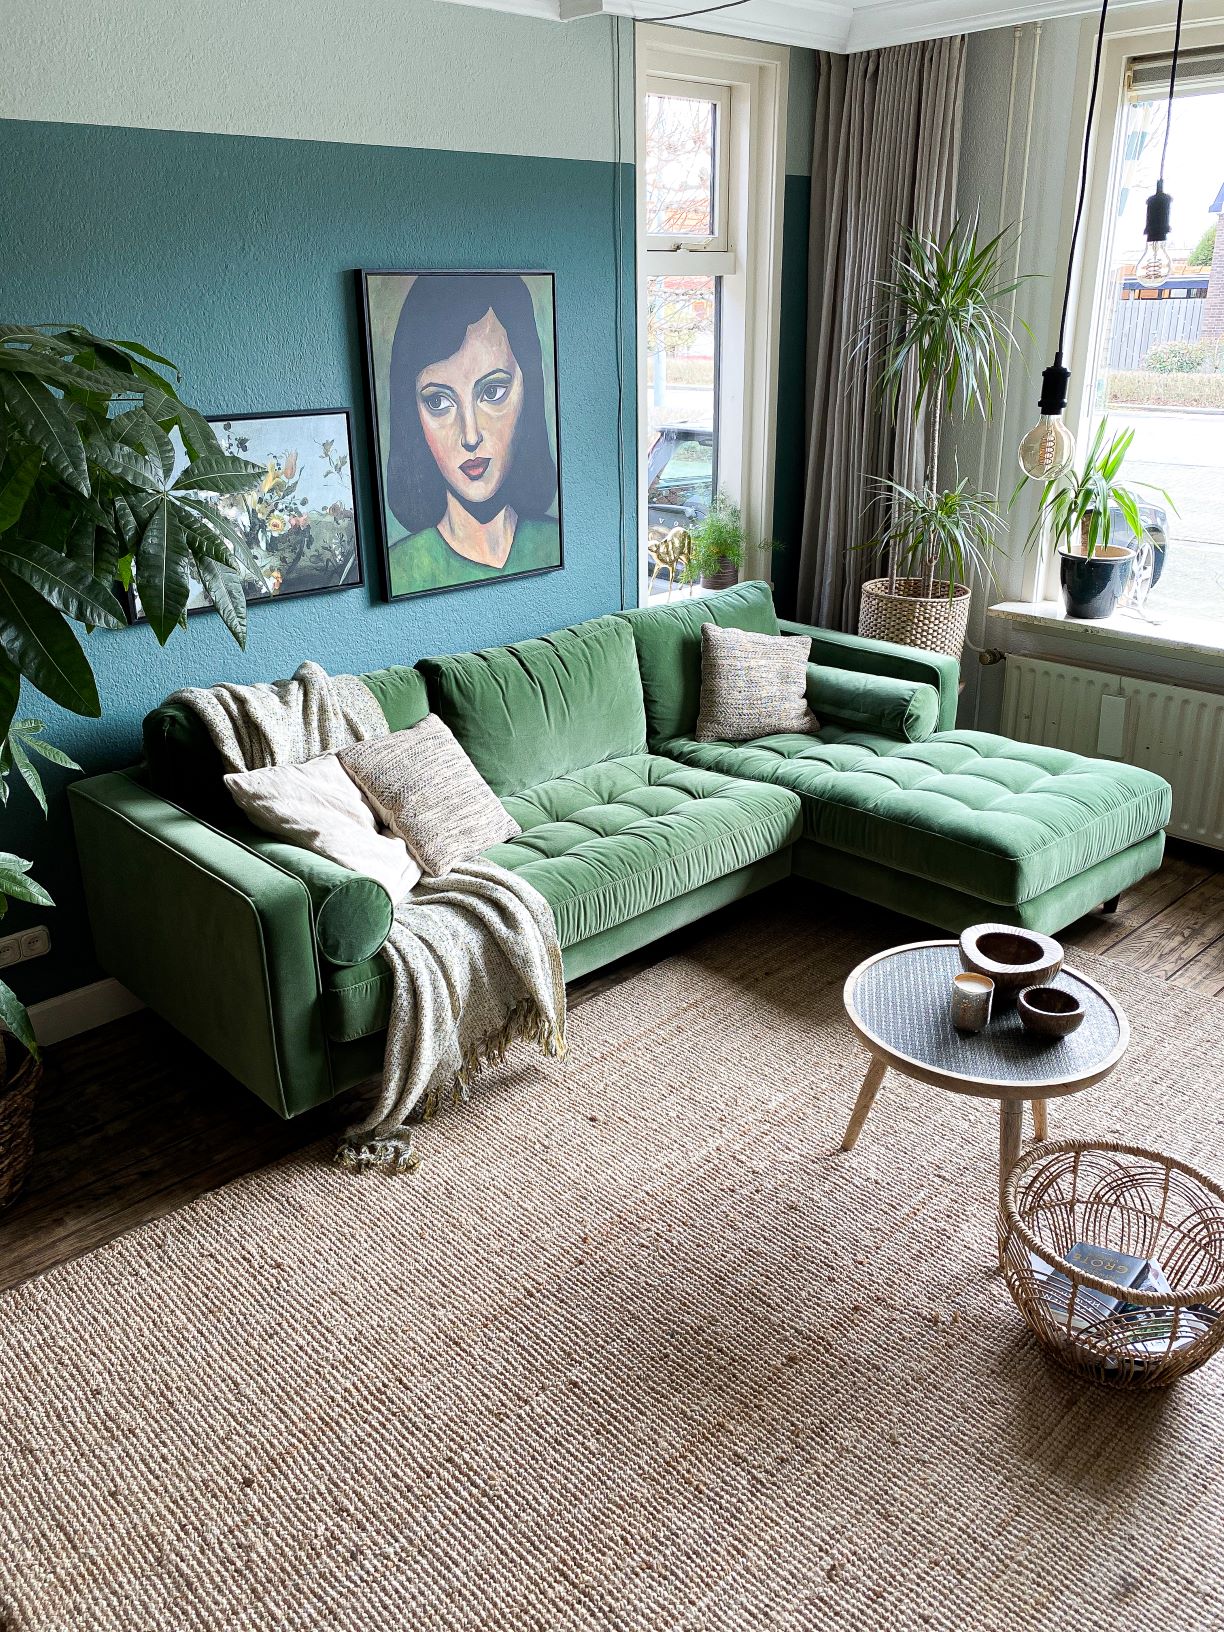 green couch in livingroom